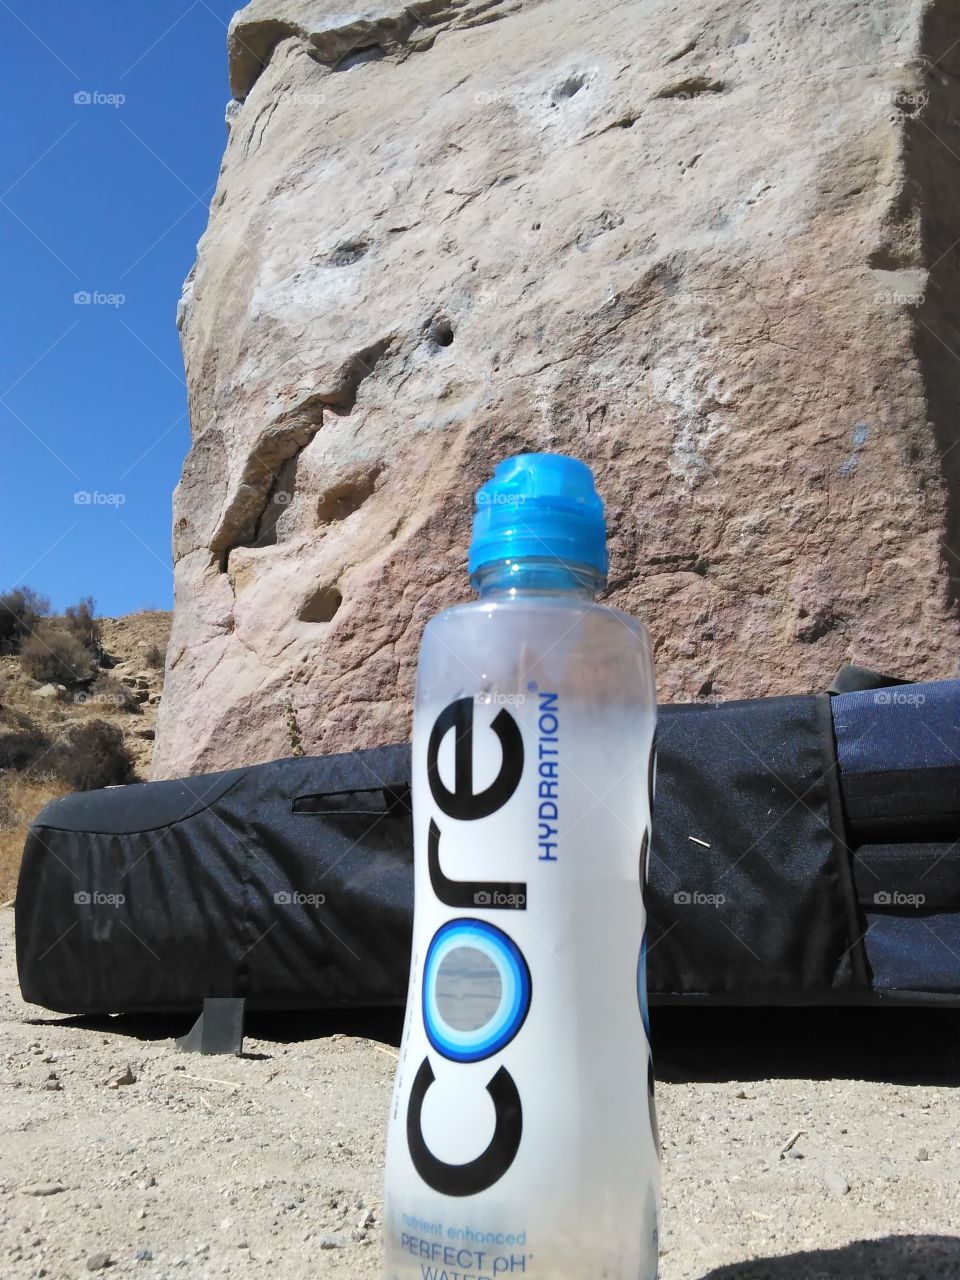 I don't know how I got inspired to take this shot. but I knew at the time when I took it, you can be a great advertisement for this product, to reach the rock climbing community